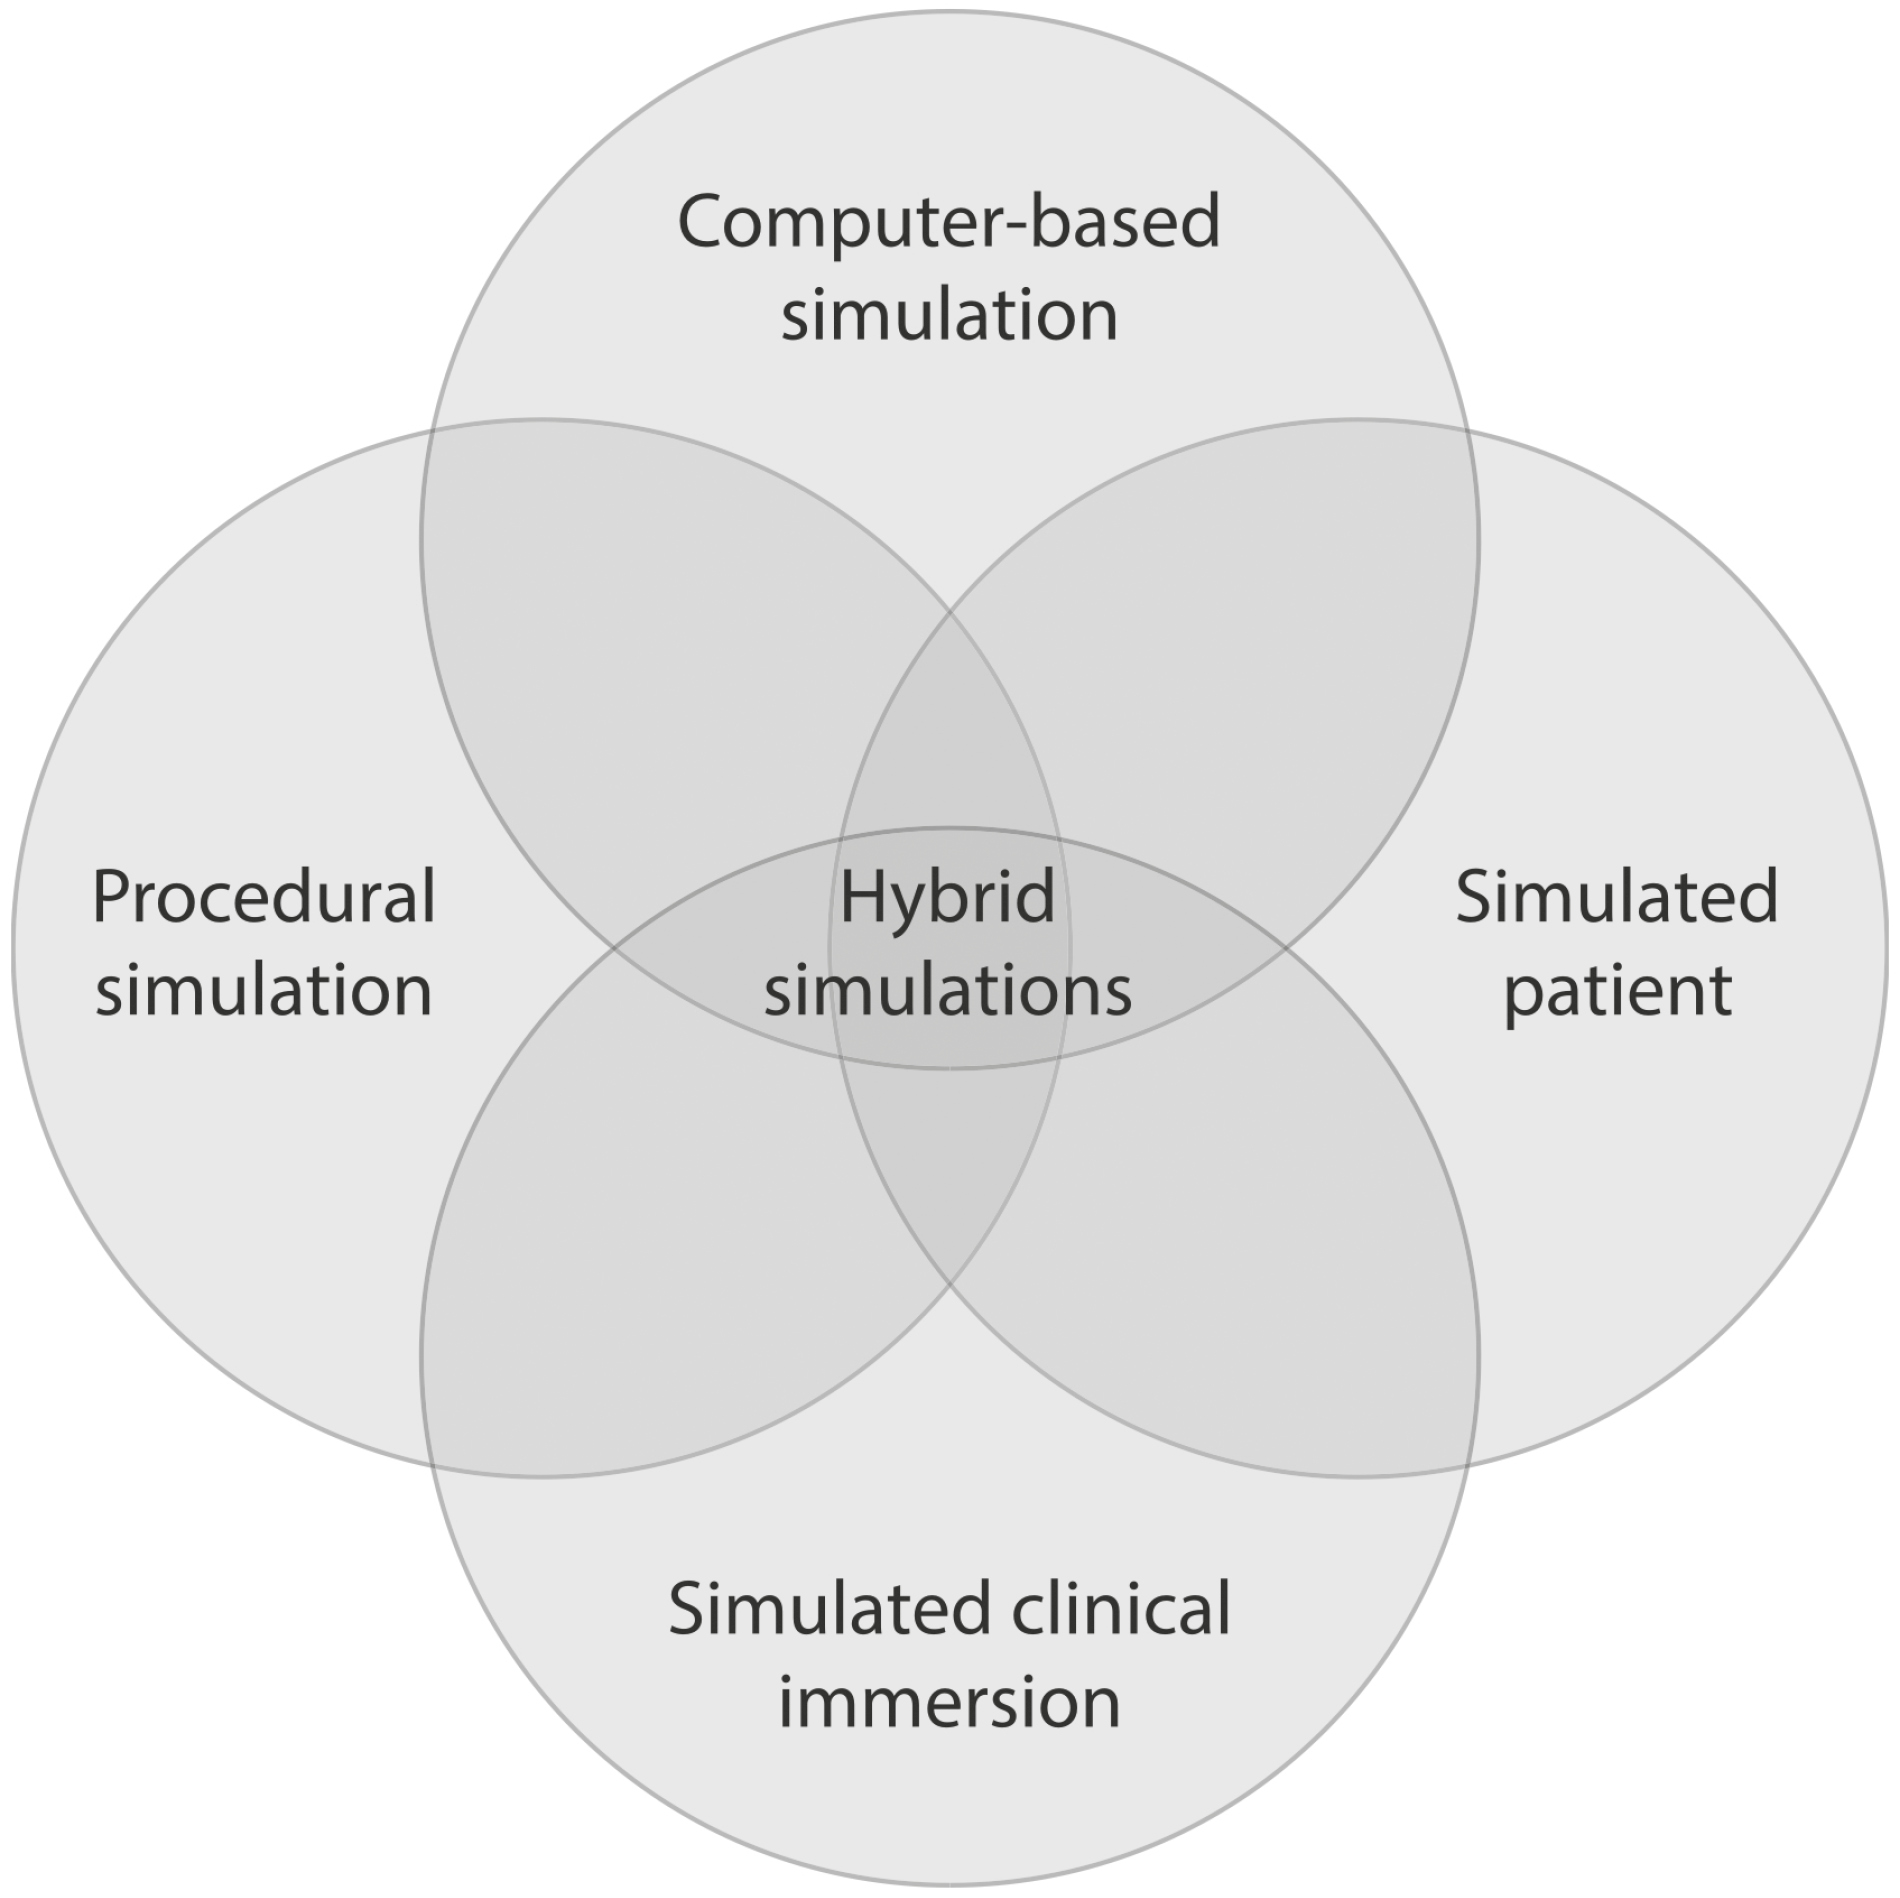 The four simulation modalities, showing areas of overlap constituting hybrid simulations.[2] Source: Chiniara G, Cole G, Brisbin K, et al. Simulation in healthcare: a taxonomy and a conceptual framework for instructional design and media selection. Med Teach. 2013 Aug;35(8):e1380–95. Reprinted by permission of the publisher (Taylor & Francis Ltd, http://www.tandfonline.com).